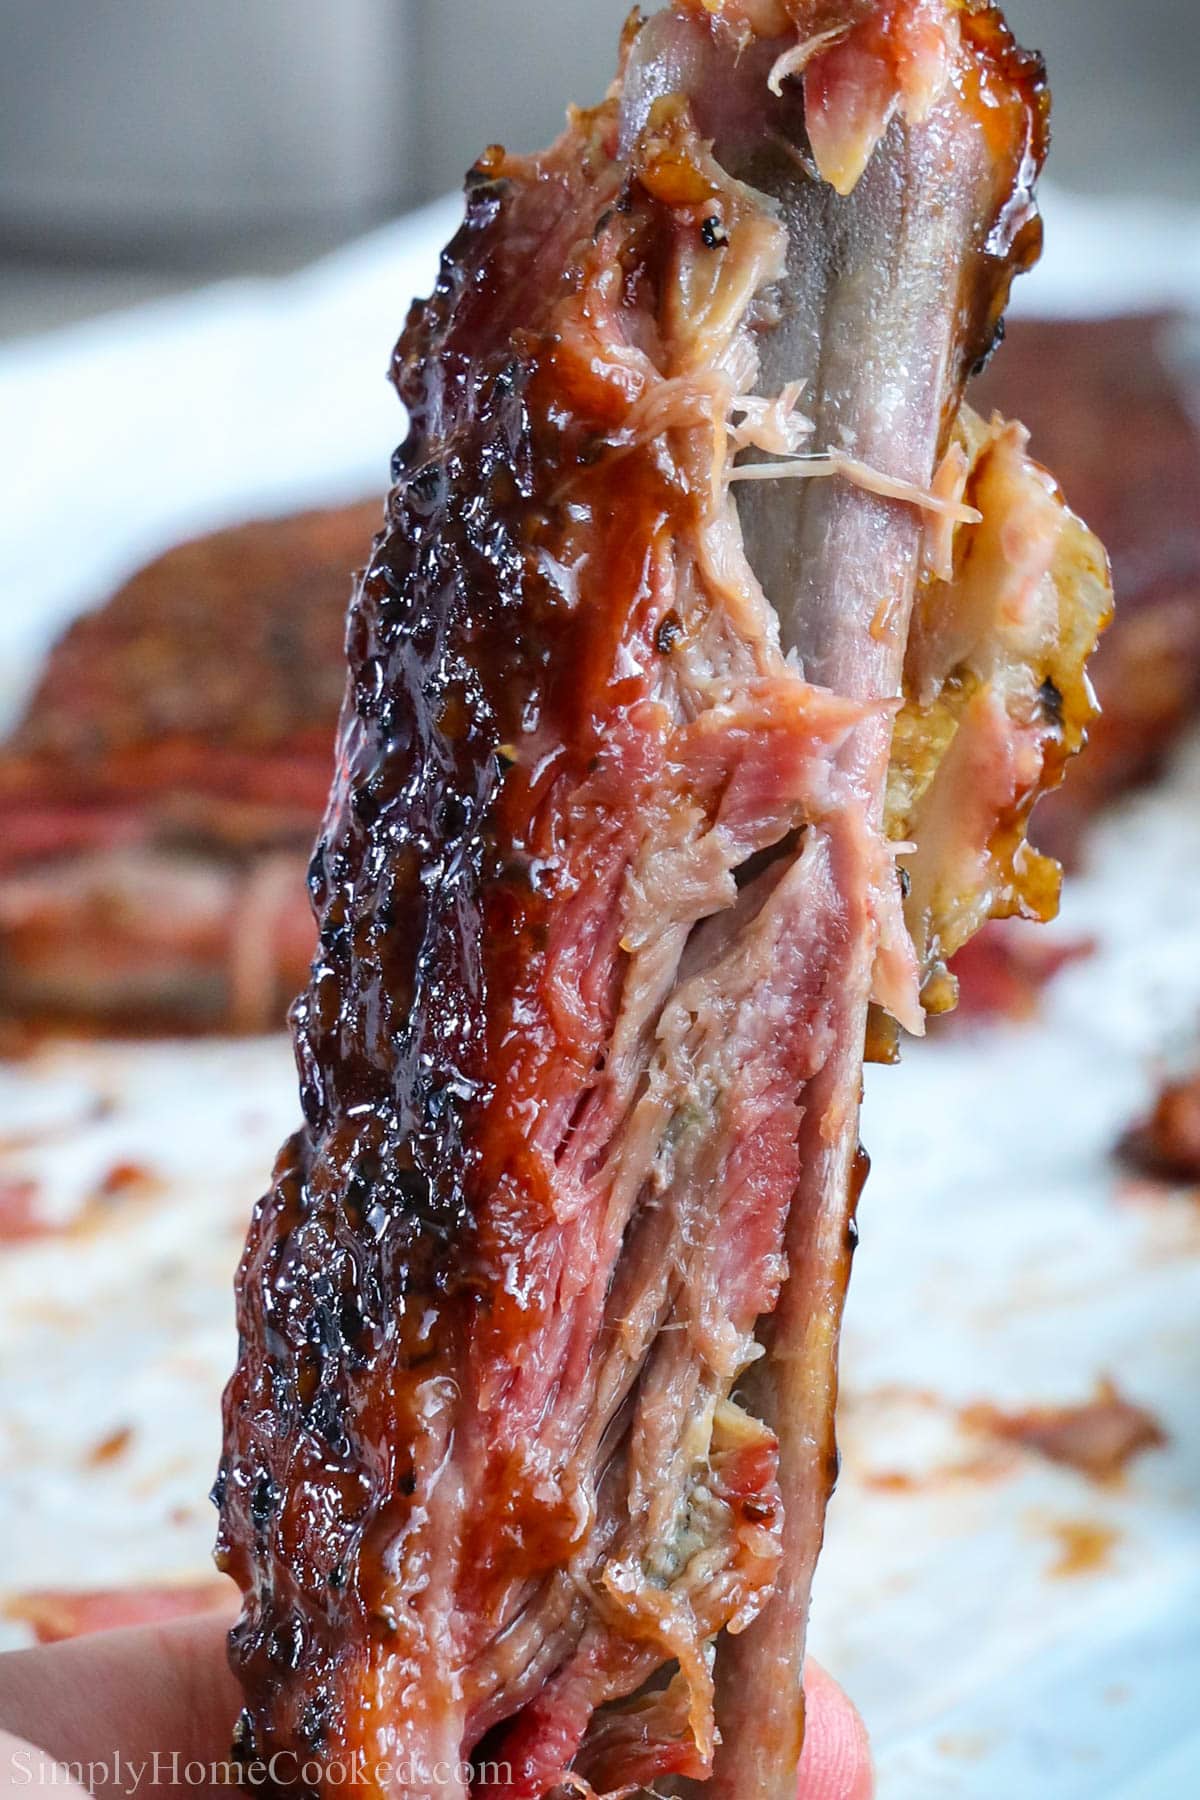 Smoked Rib with meat falling off the bone.